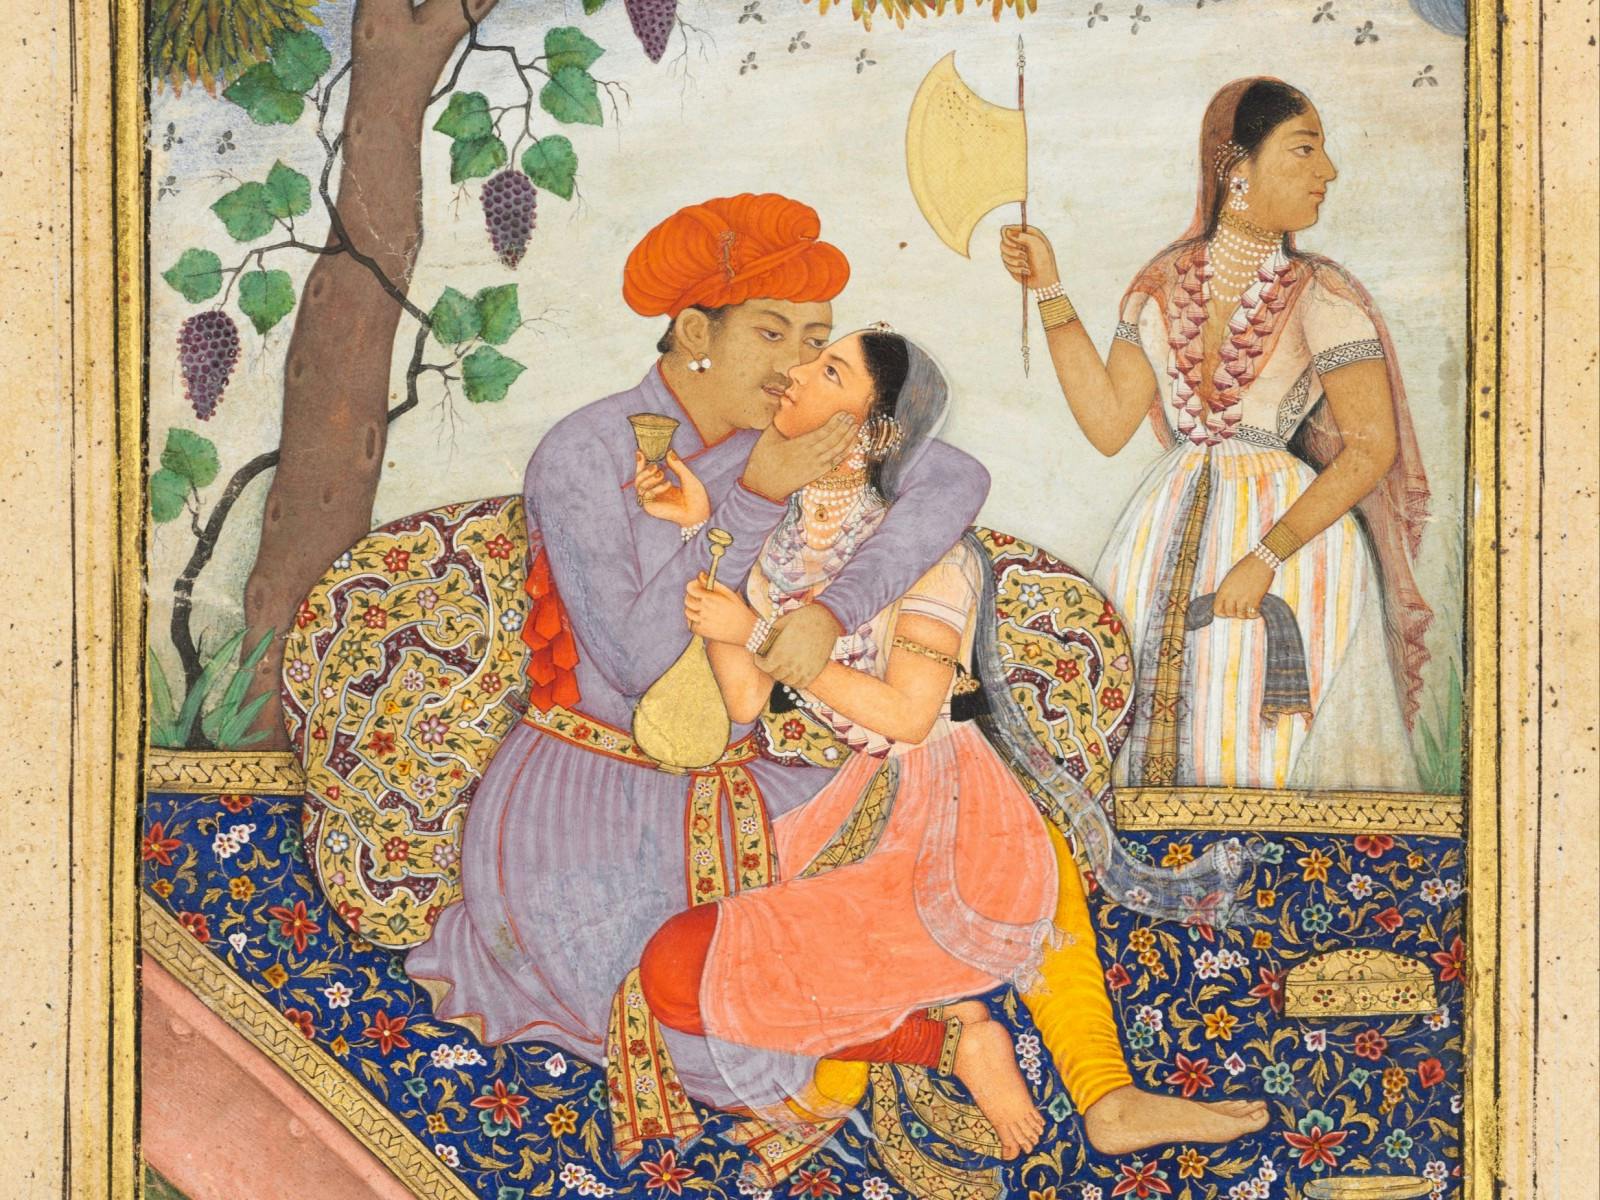 Lovers Embracing, c. 1630. India, Mughal Dynasty (1526-1756) (The Cleveland Museum of Art, Andrew R. and Martha Holden Jennings Fund 1971.91)